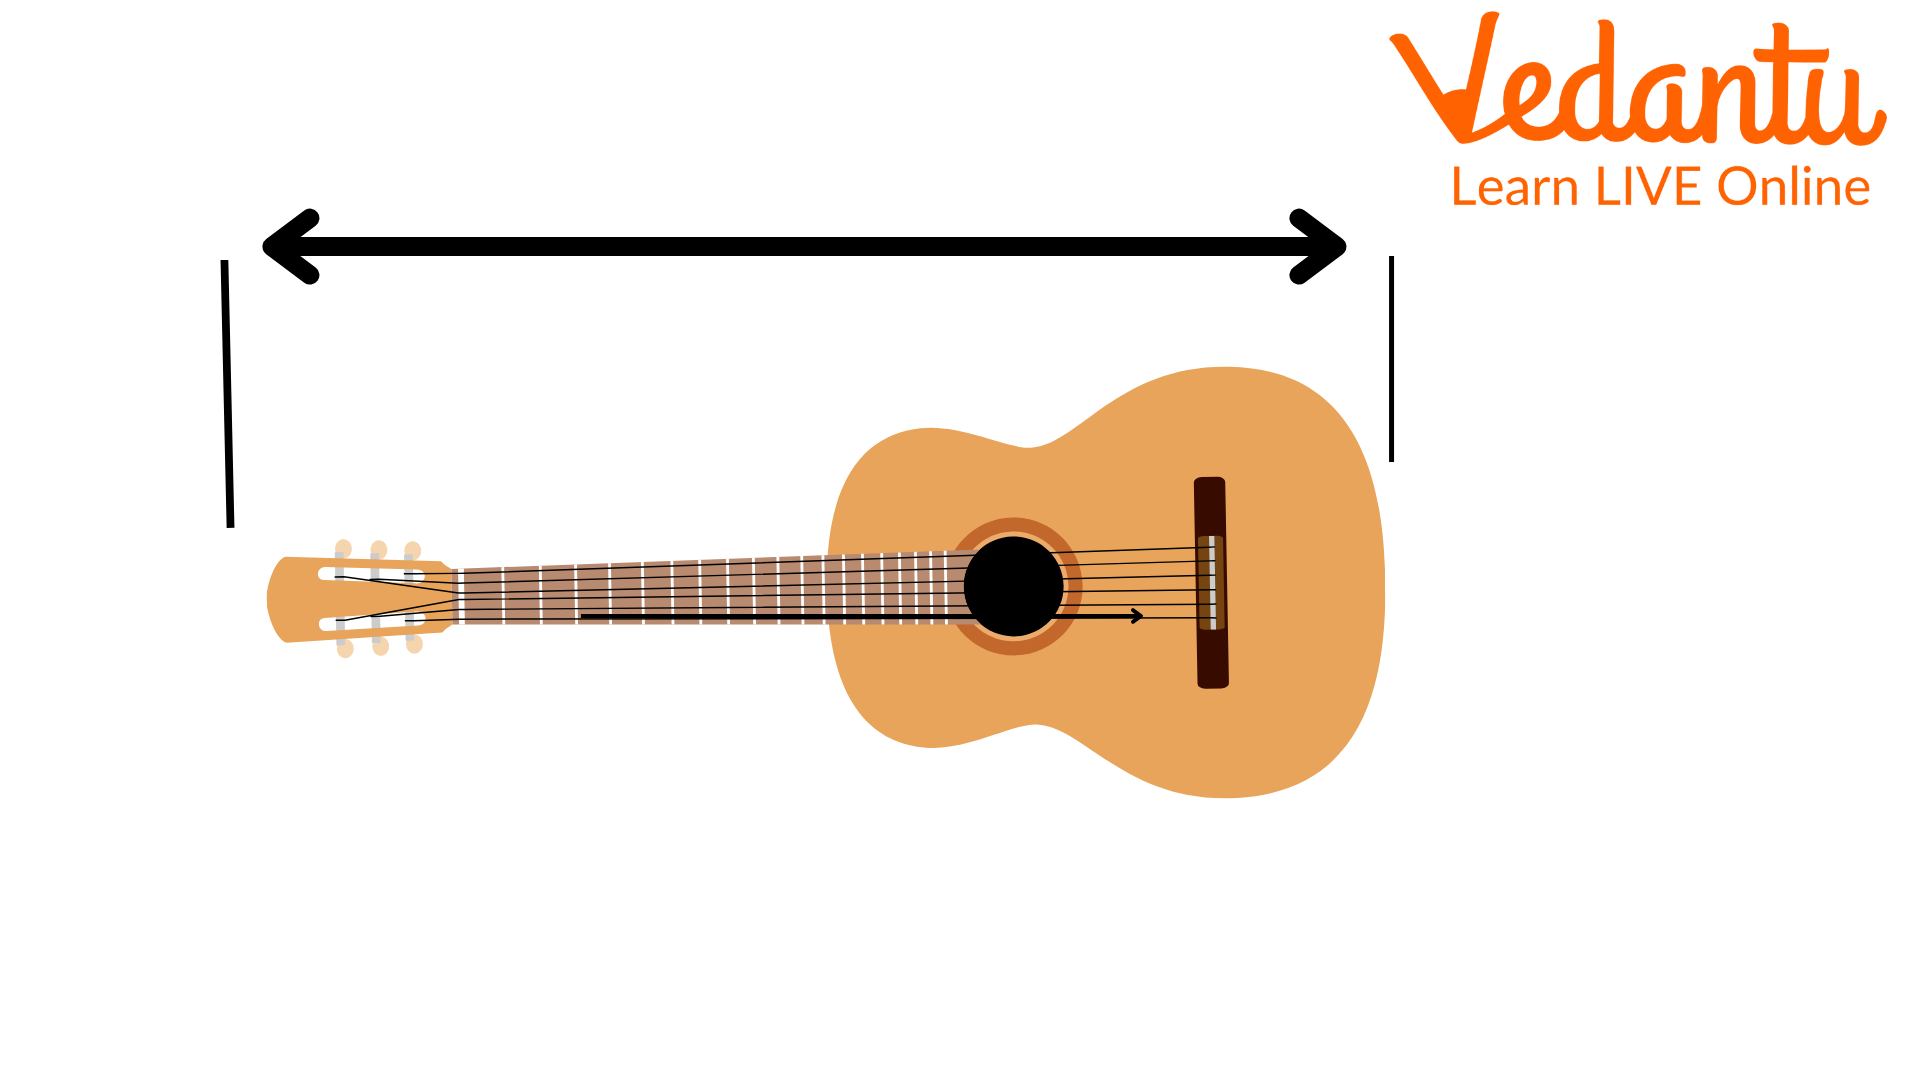 The Length of the Guitar